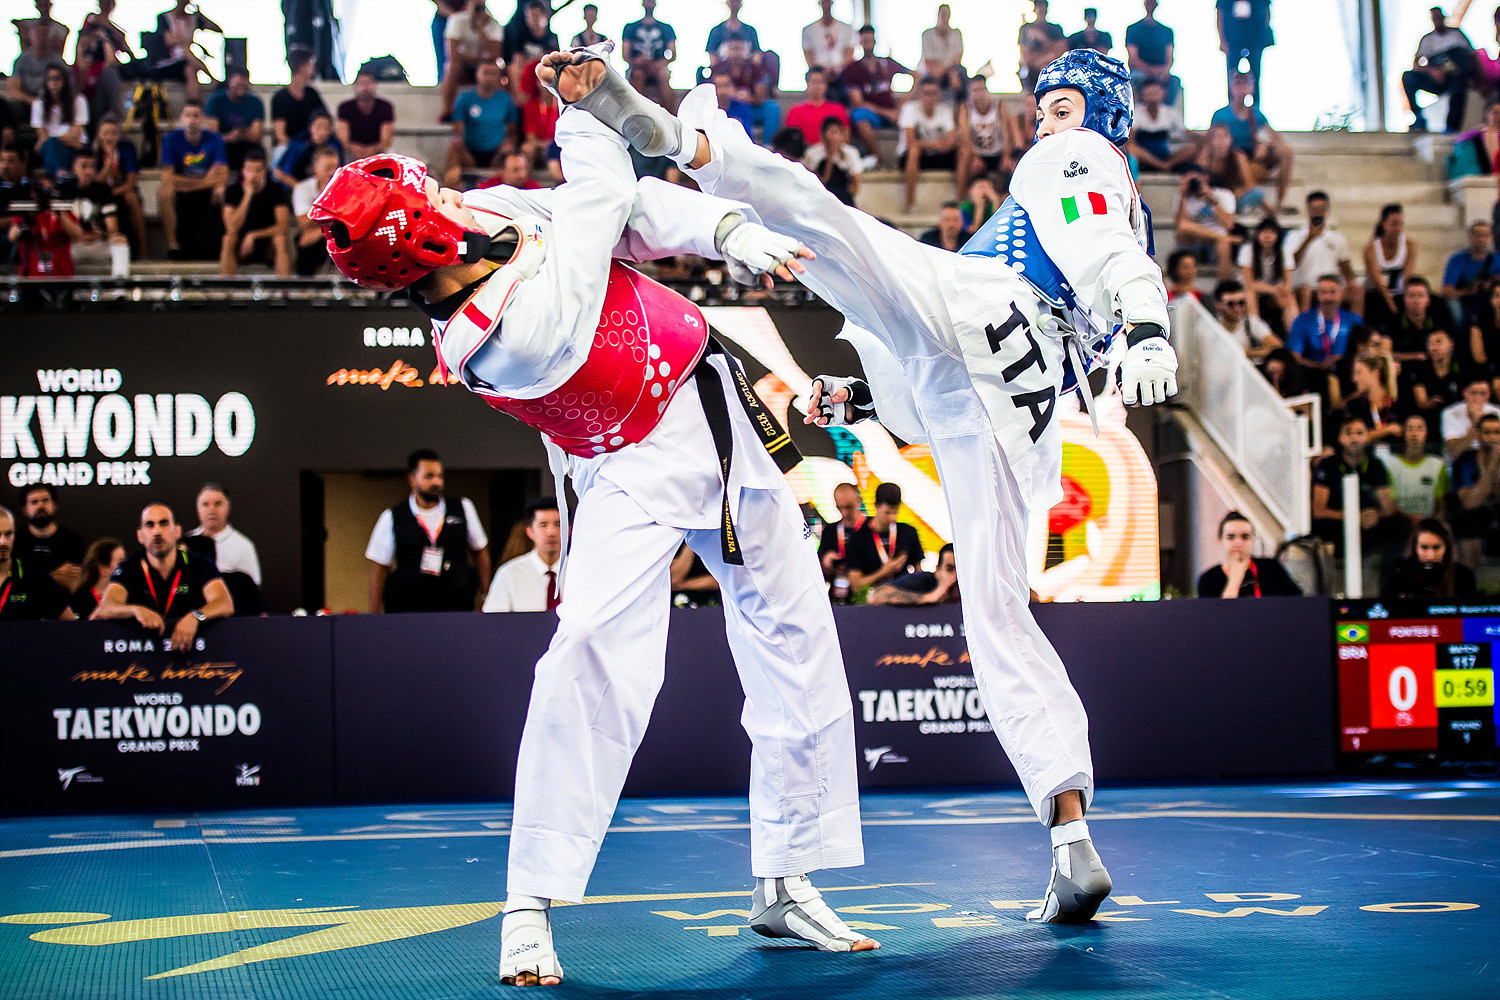 Italy's Simone Alessio, right, is one of four gold medallists from last month's Manchester 2019 World Taekwondo Championships that will compete in the opening WT Grand Prix Series event of the year which starts in Rome tomorrow ©WT